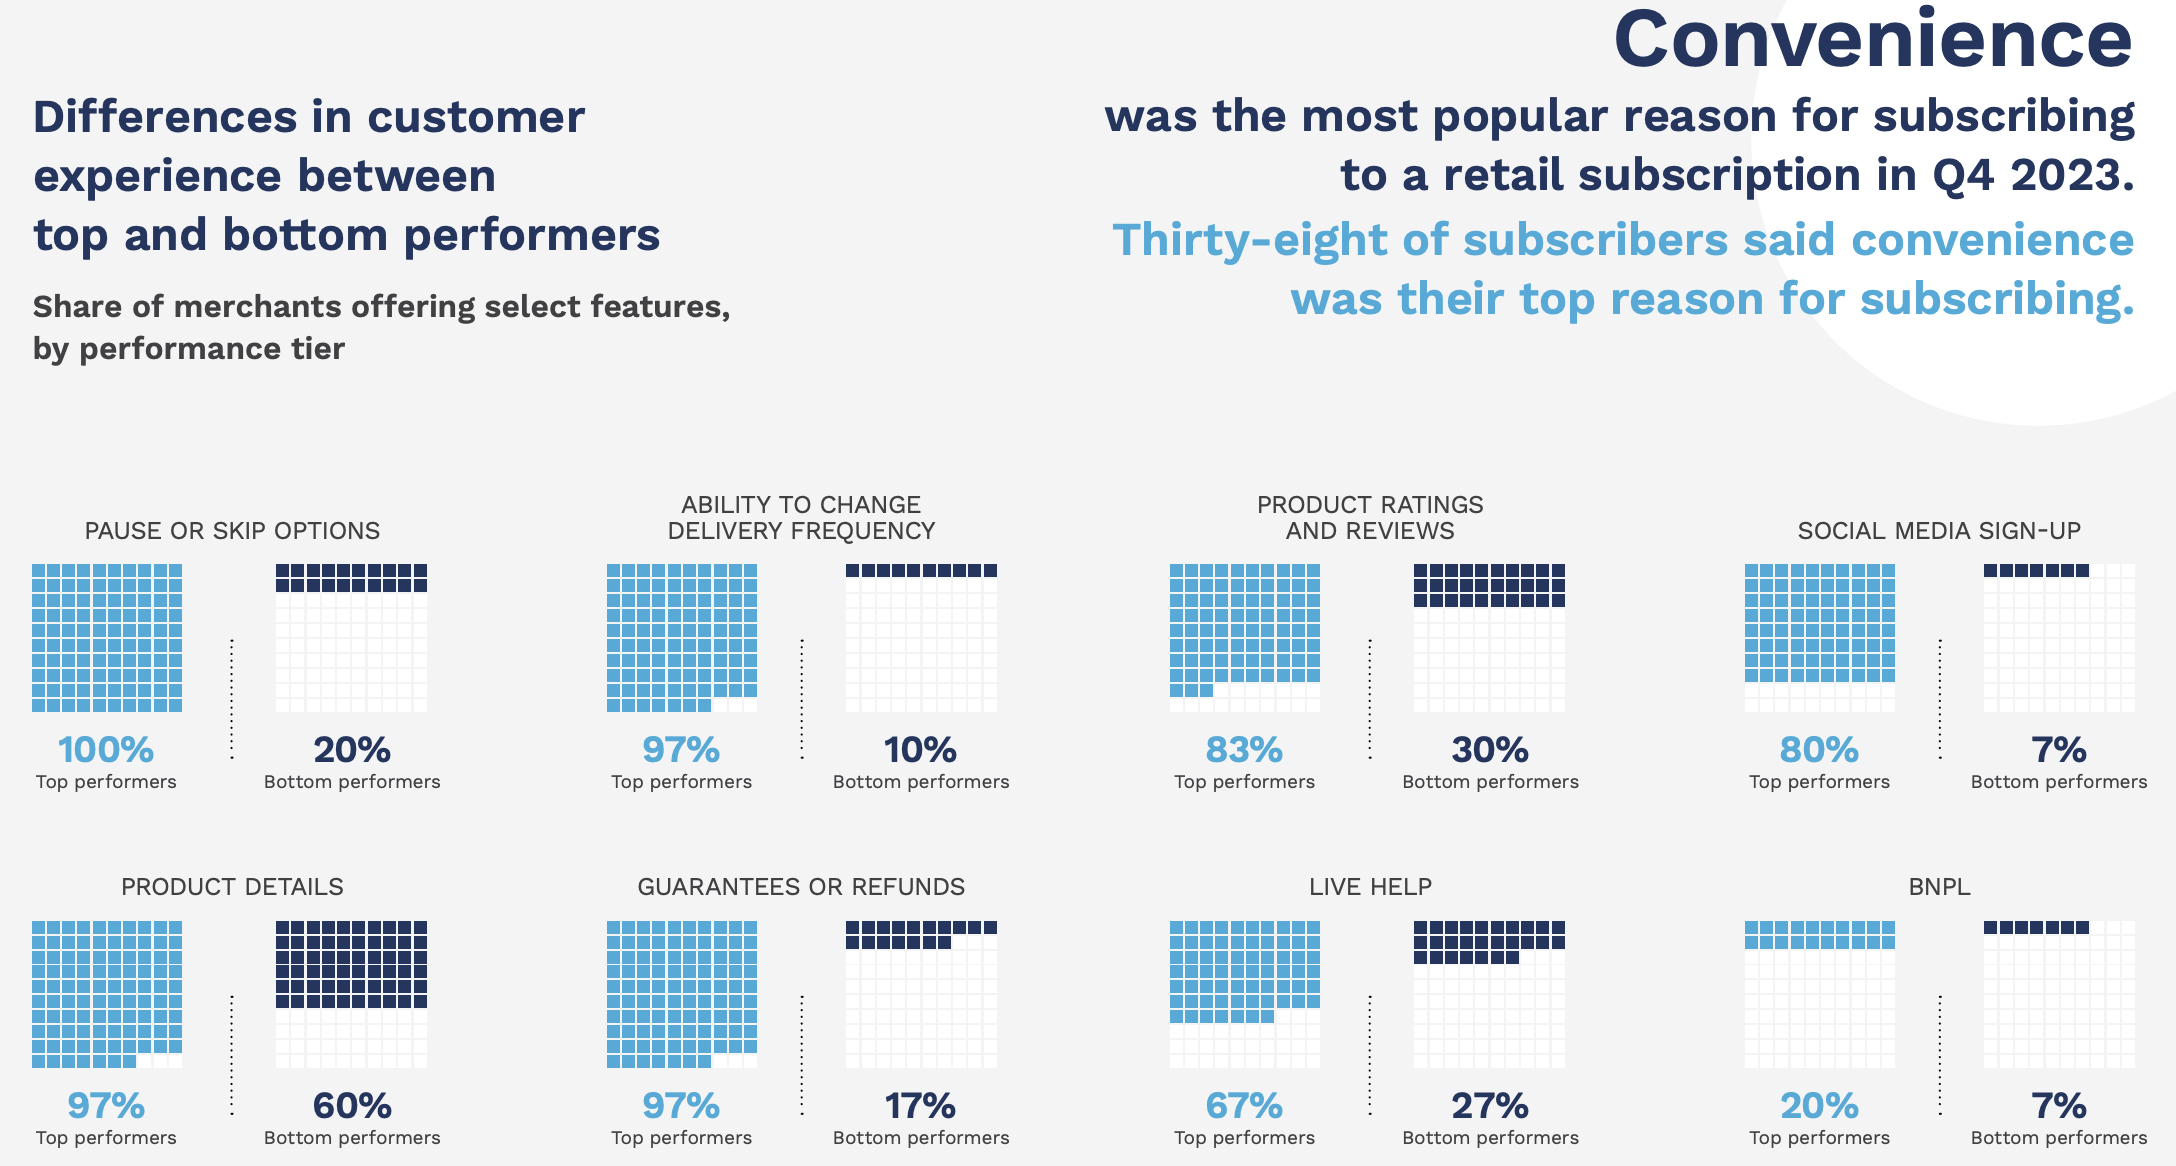 Convenience most popular reason for subscribing to retail subscription